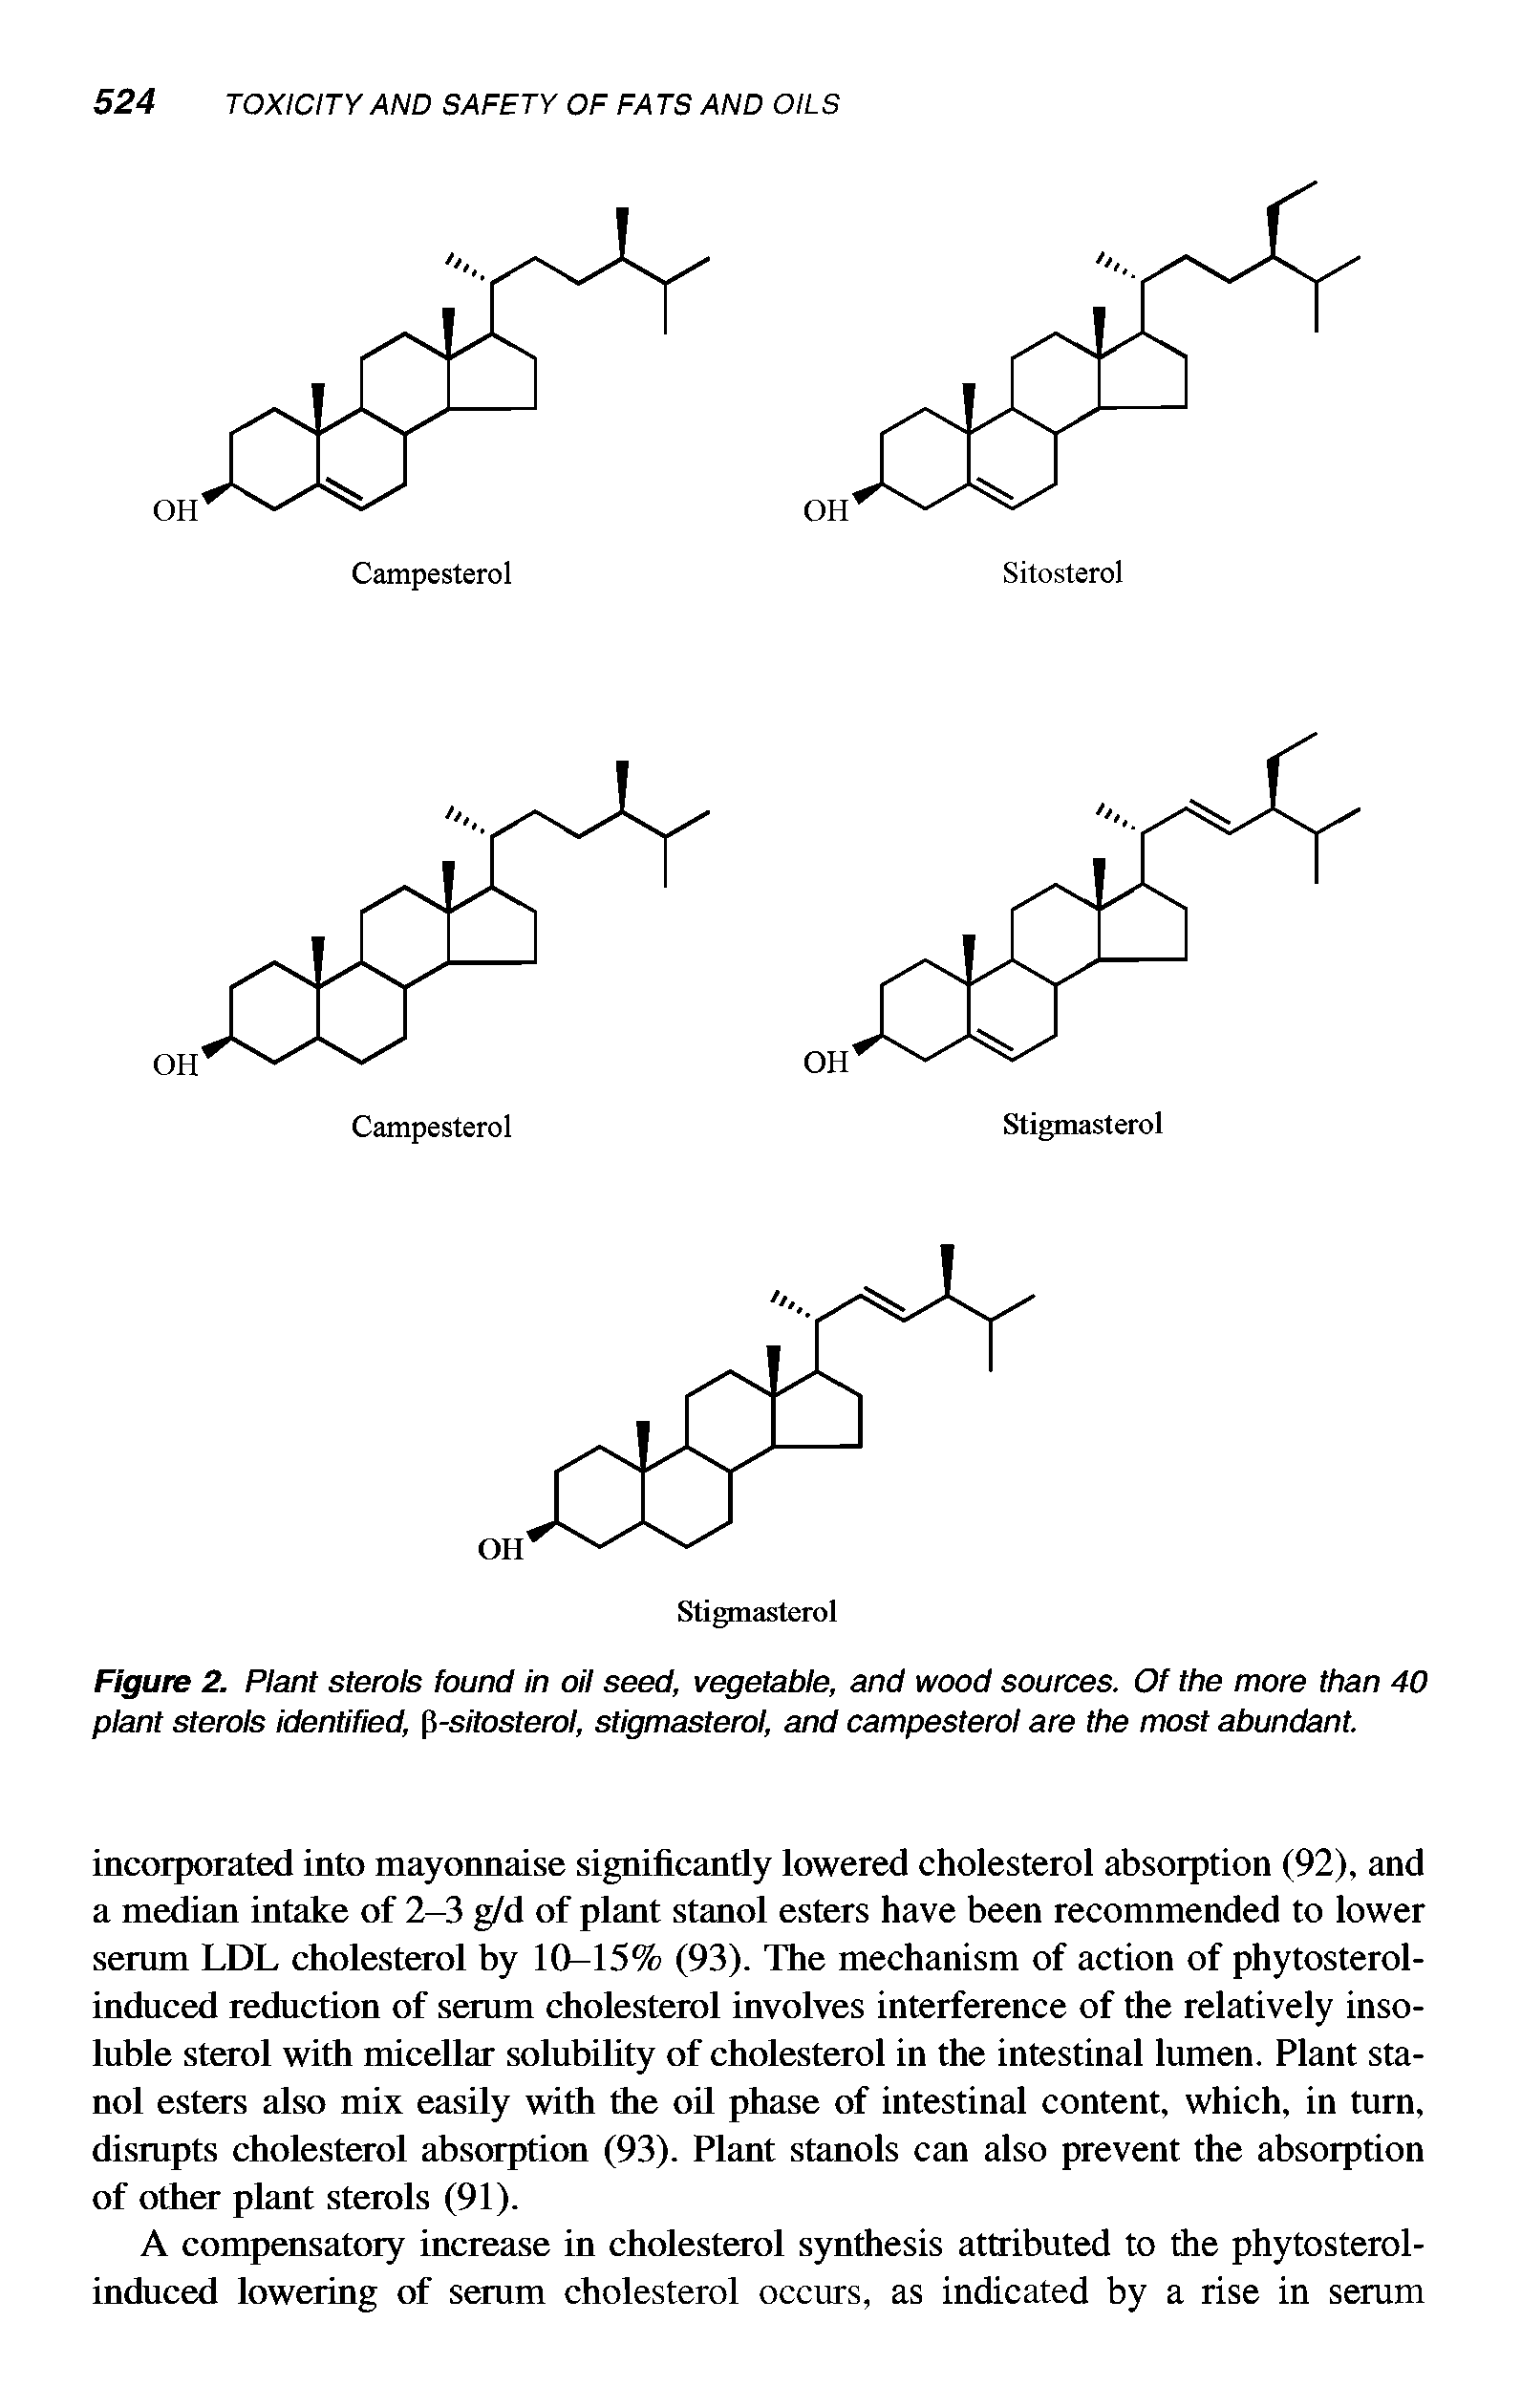 Figure 2. Plant sterols found in oil seed, vegetable, and wood sources. Of the more than 40 plant sterols identified, -sitosterol, stigmasterol, and campesterol are the most abundant.